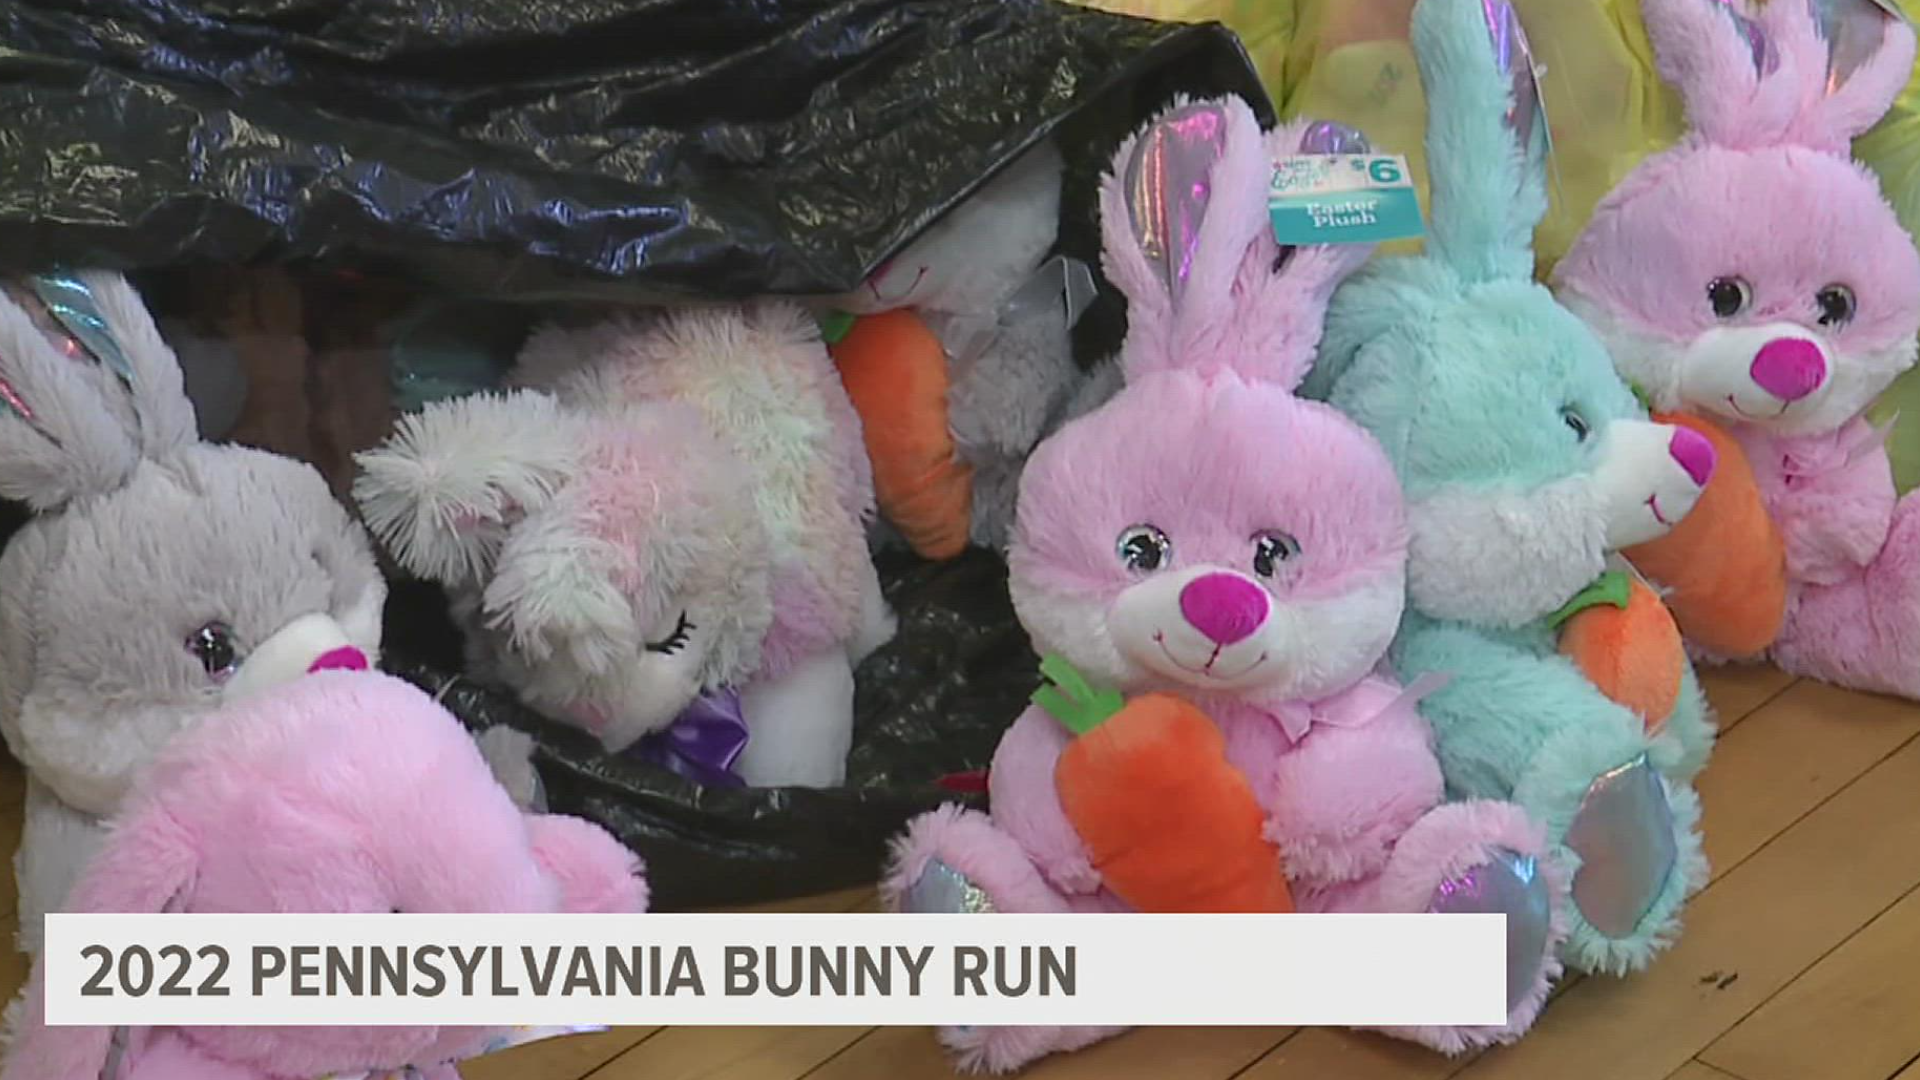 Volunteers of the Hummelstown Fire Department along with community members and motorcyclists will collect bunnies to help children in need ahead of Easter Sunday.